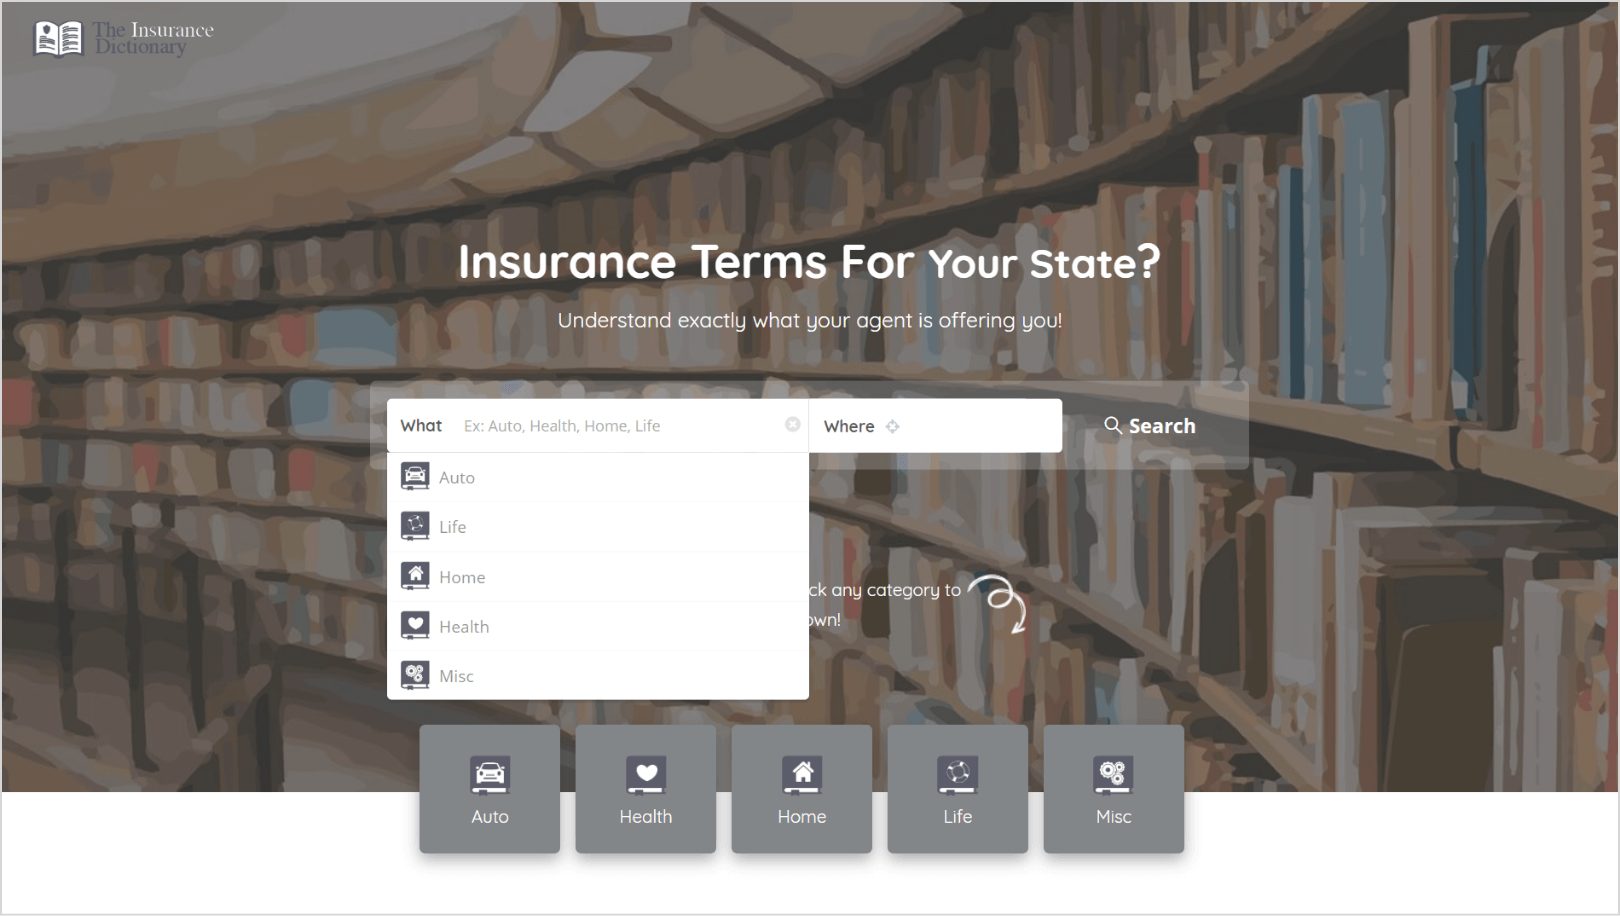 The Insurance Dictionary educational tool startup